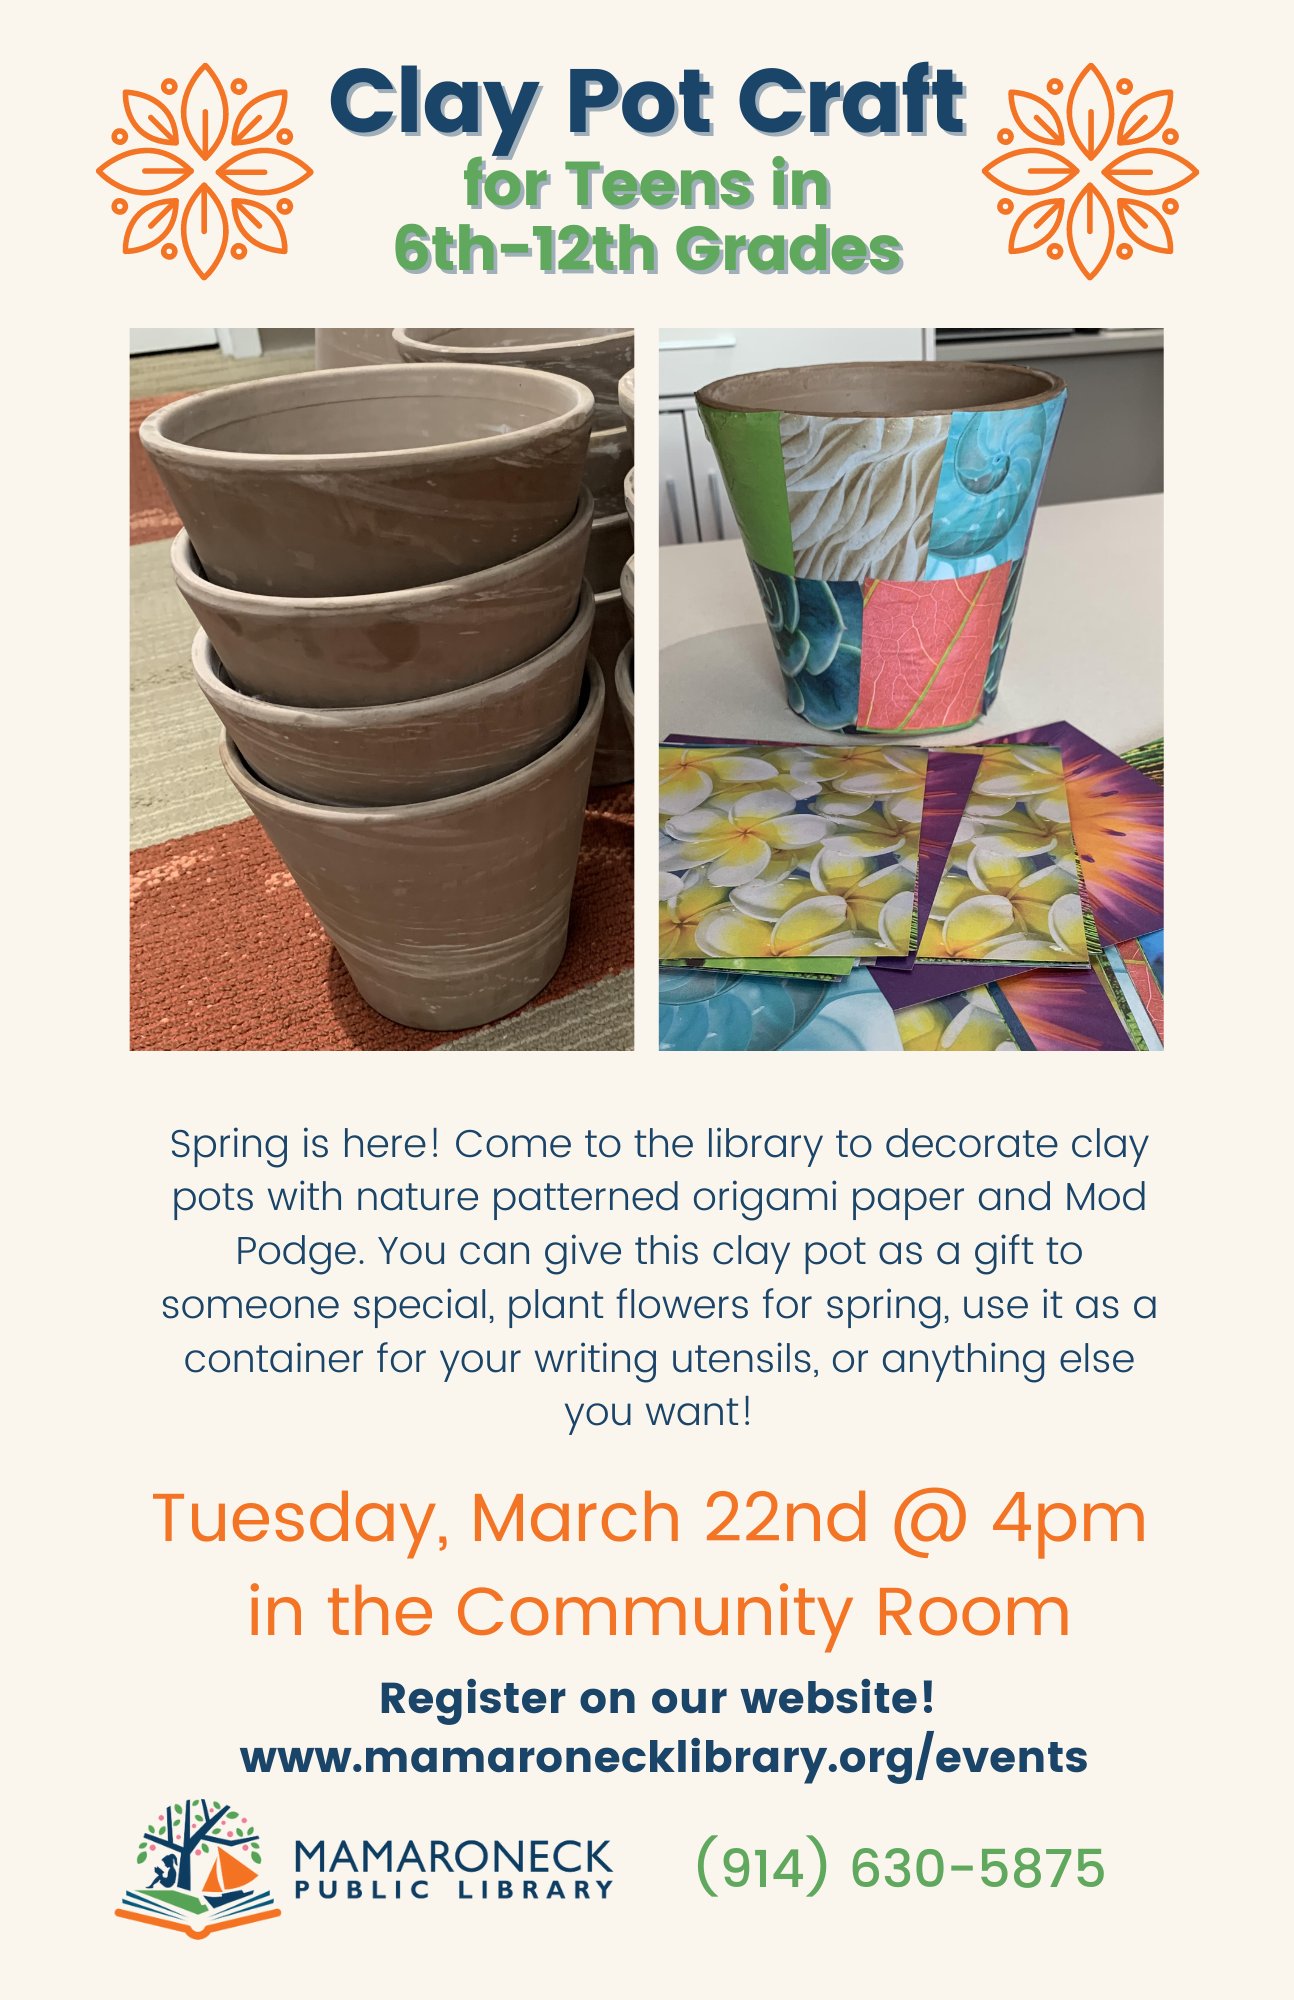 Clay pot craft for Teens March 22